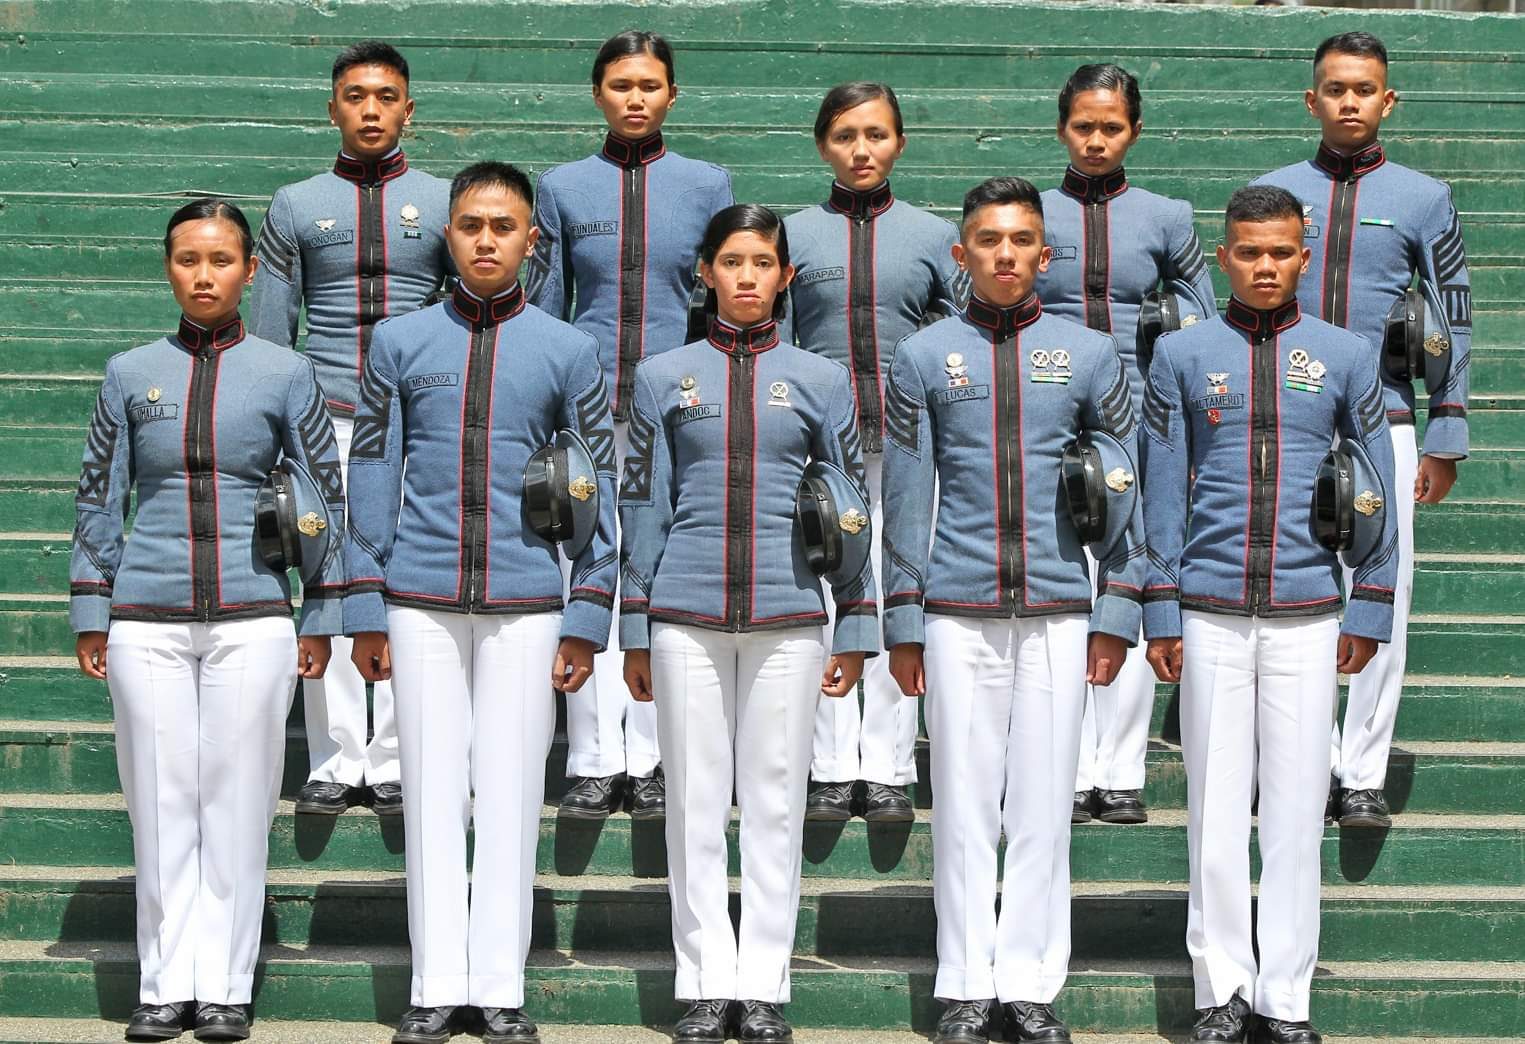 MABALASIK. The Top 10 of Philippine Military Academy's (PMA) Mabalasik Class of 2019. A total of 263 cadets will graduate from the PMA on Sunday, May 26. Photo by Mau Victa/Rappler 